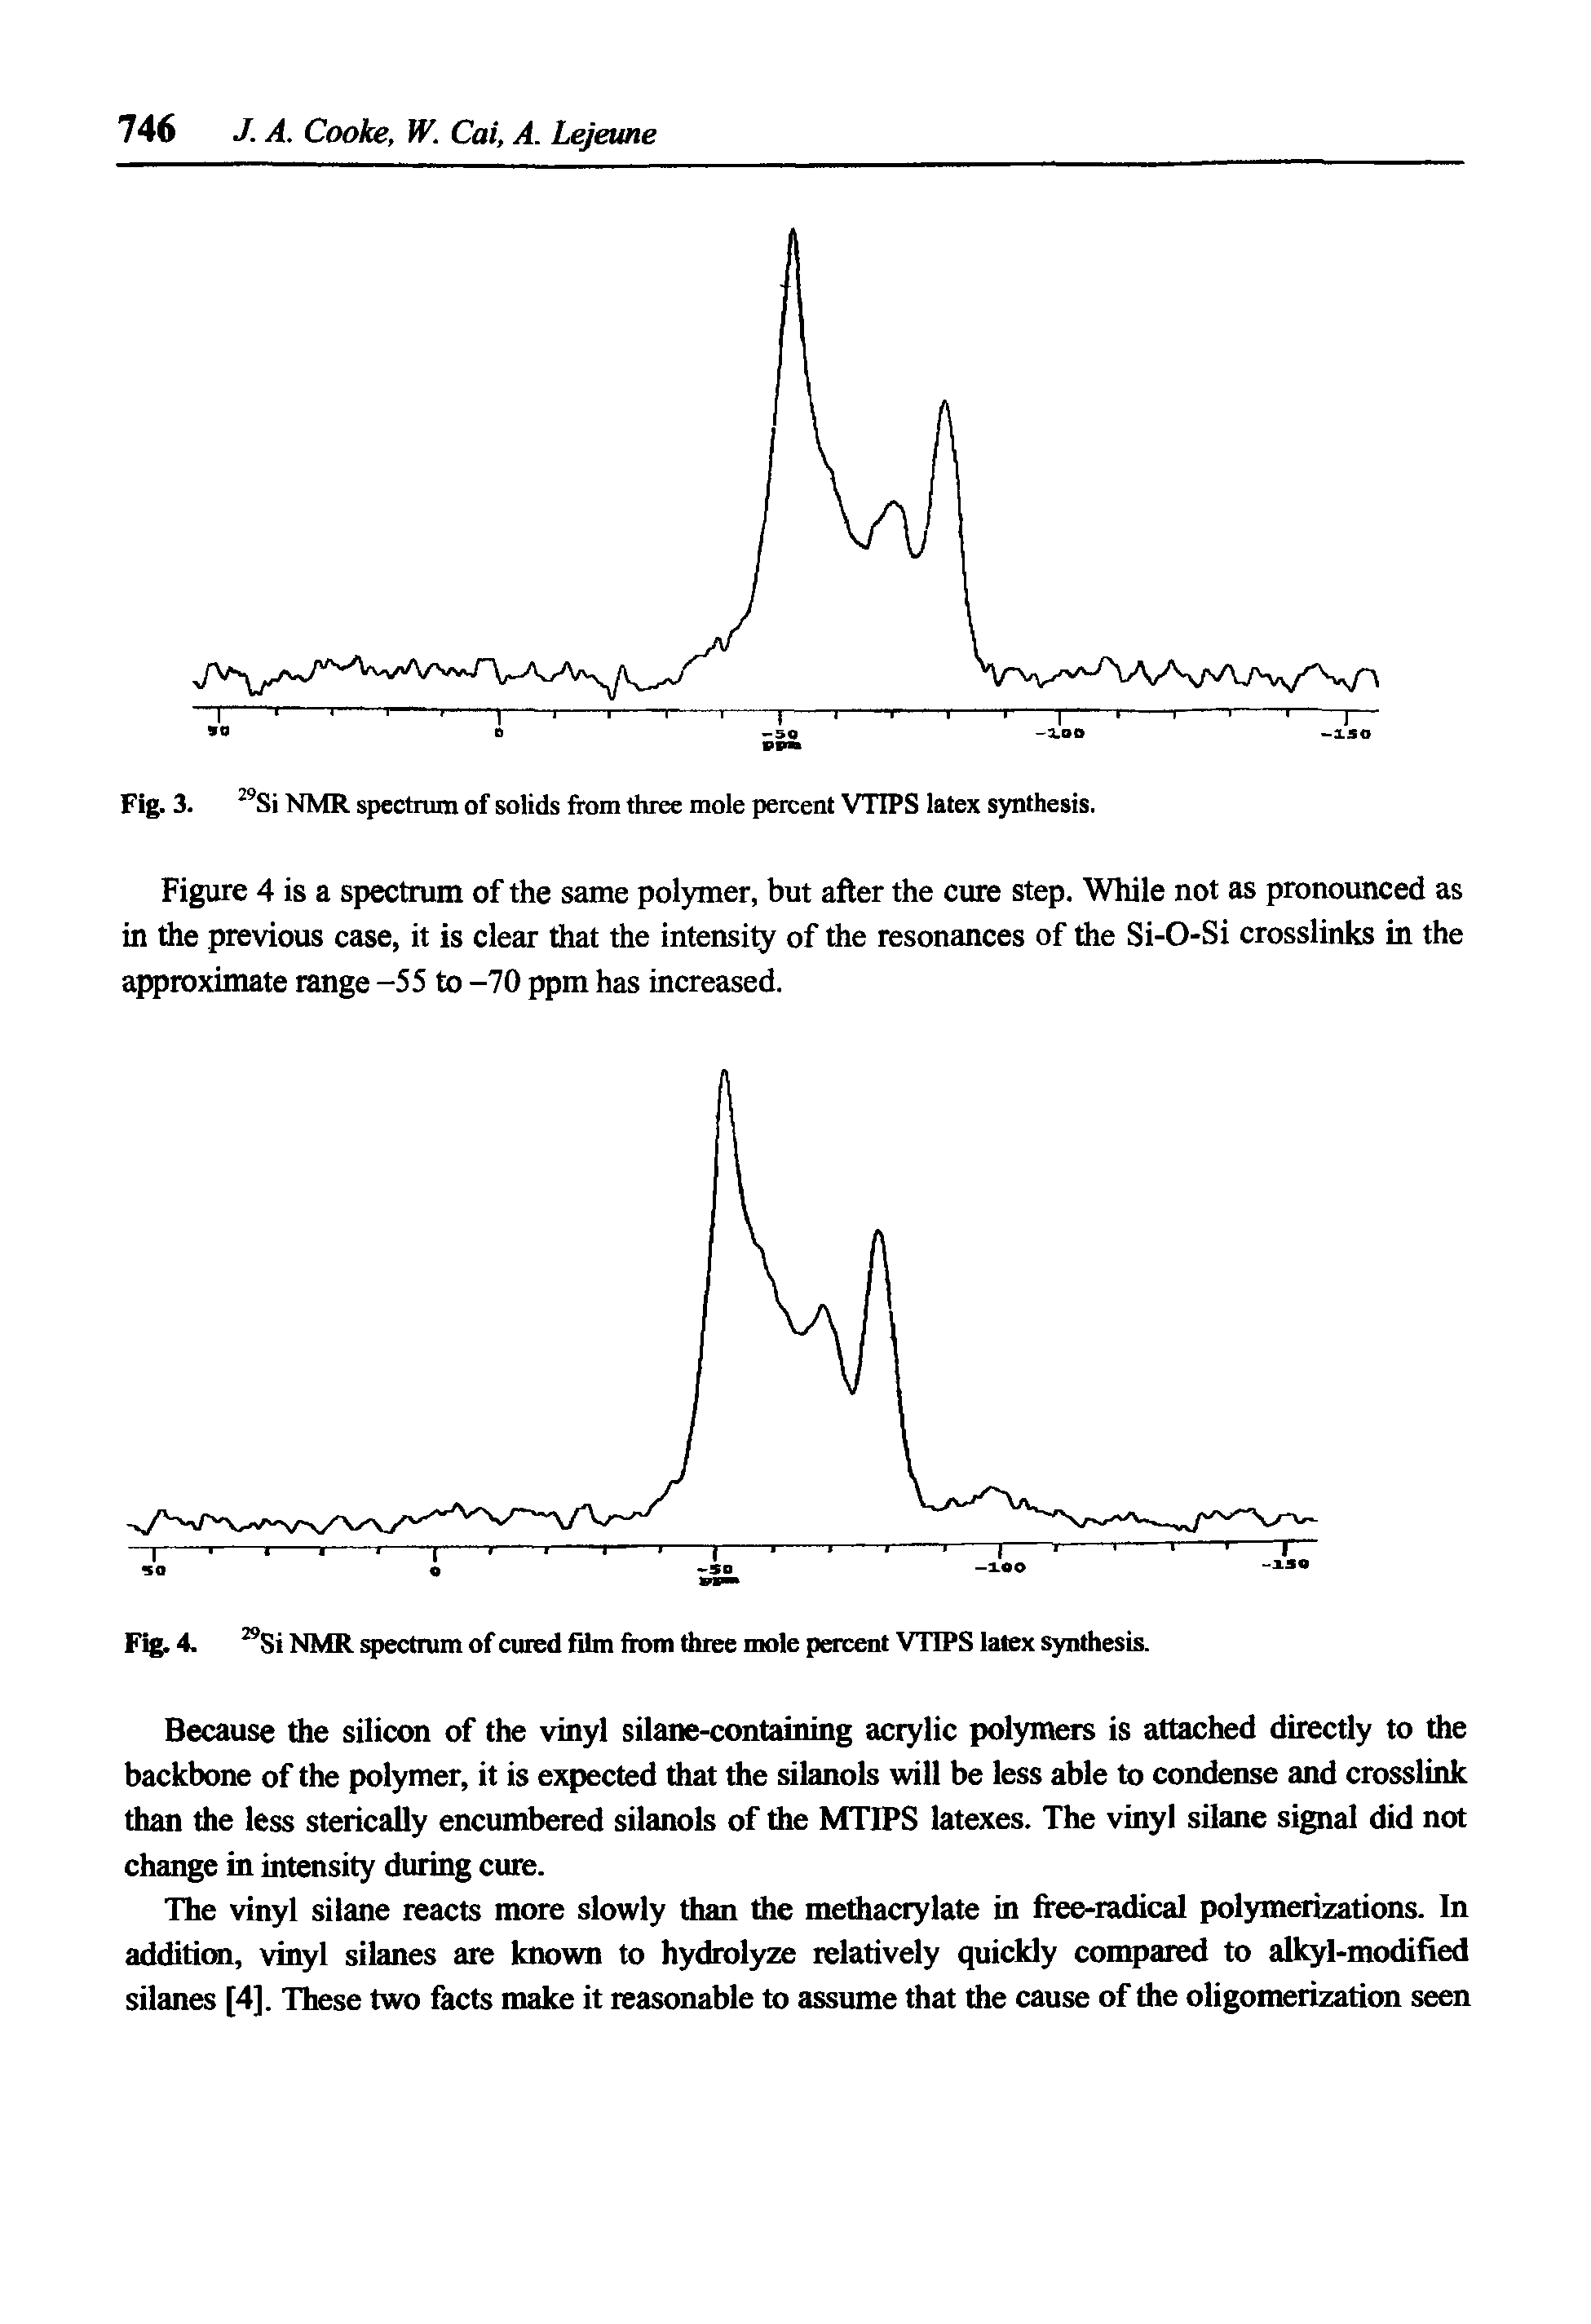 Fig. 4. Si NMR spectrum of cured film from three mole percent VTIPS latex synthesis.